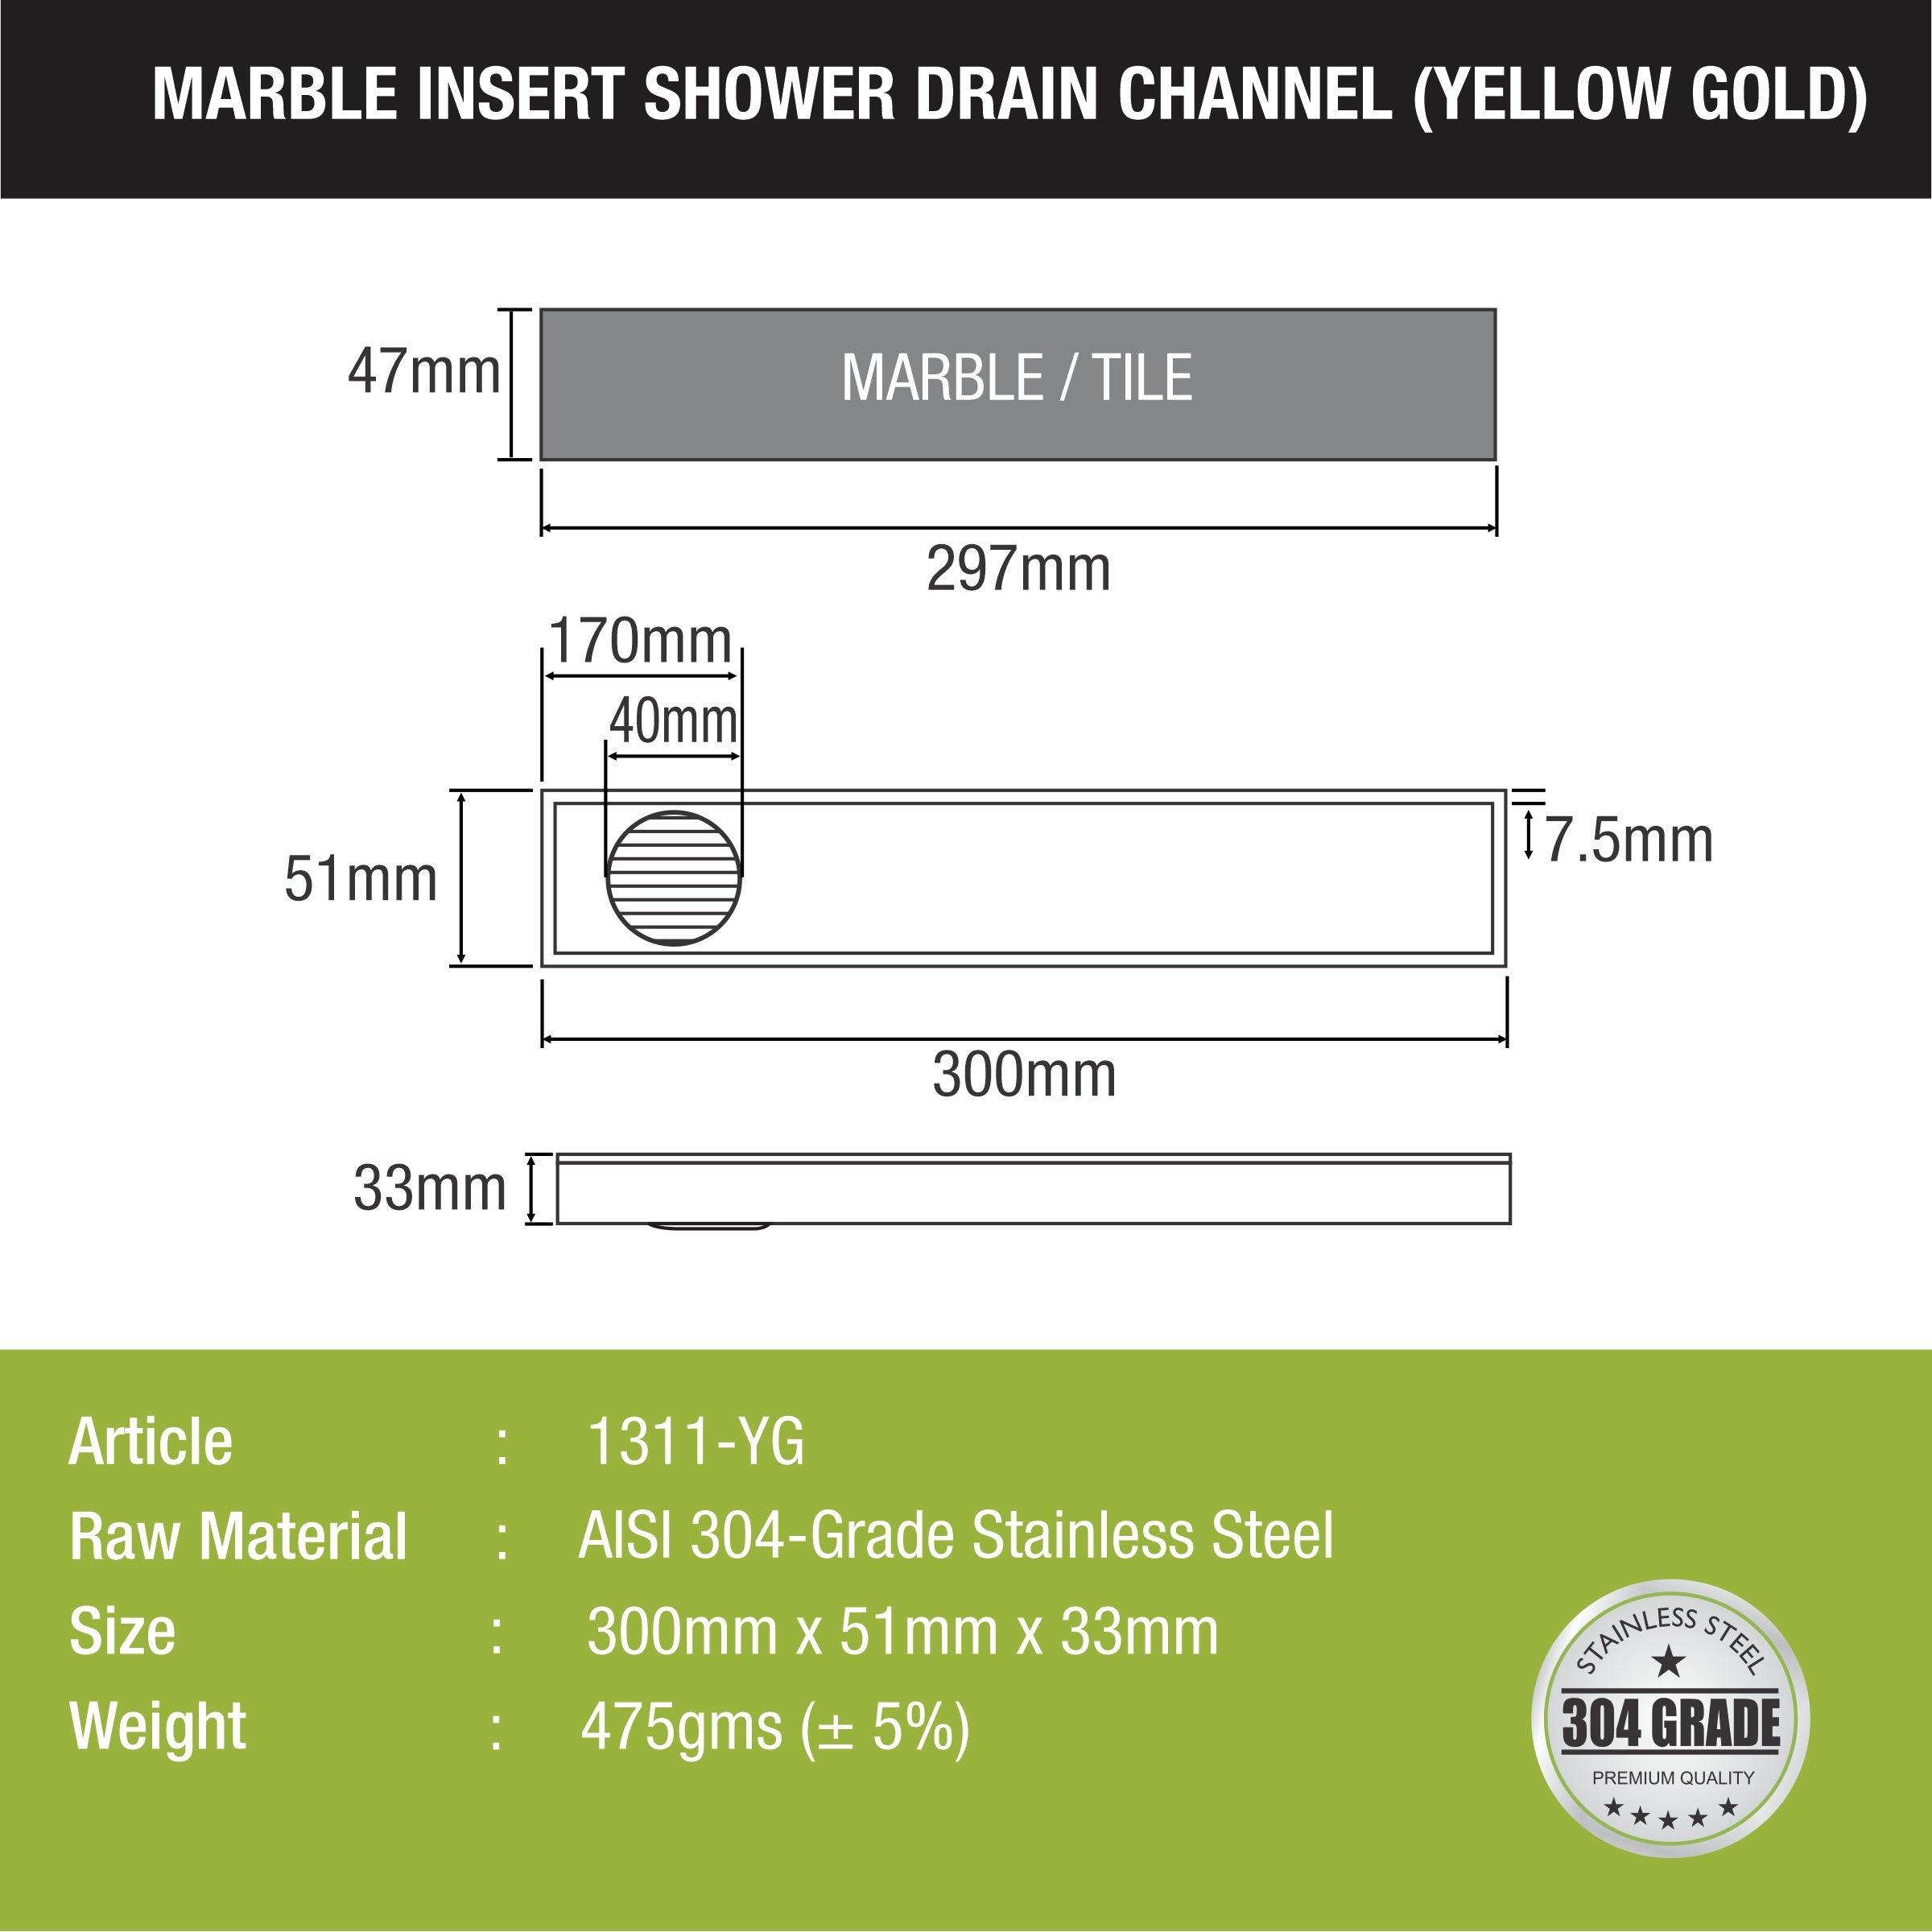 Marble Insert Shower Drain Channel - Yellow Gold (12 x 2 Inches) sizes and dimensions